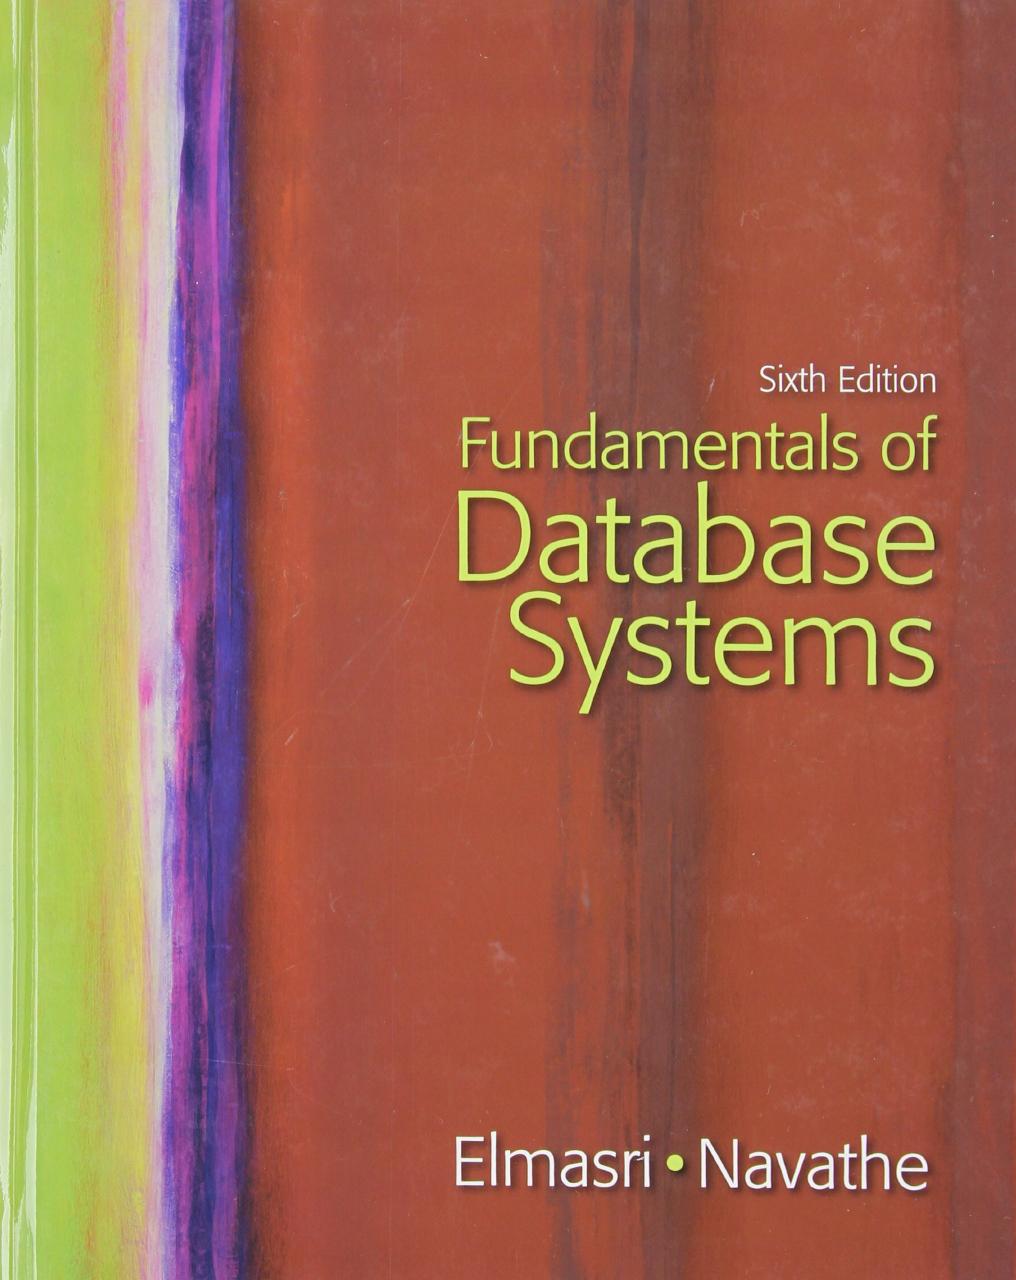 Image result for fundamentals of database systems